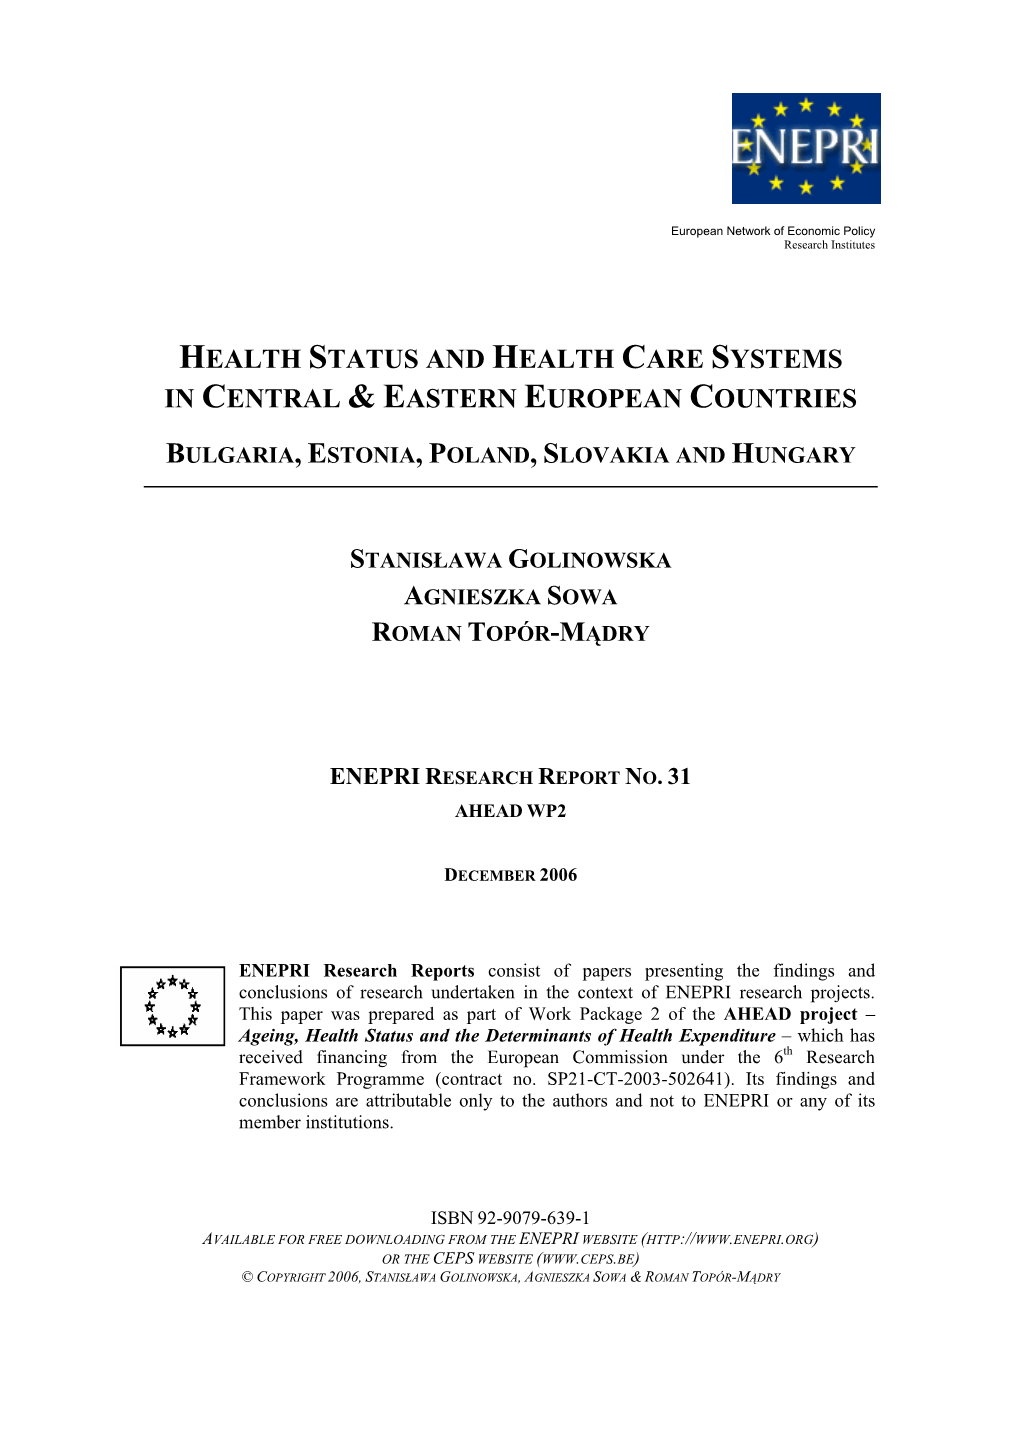 Health Status and Health Care Systems in Central & Eastern European Countries